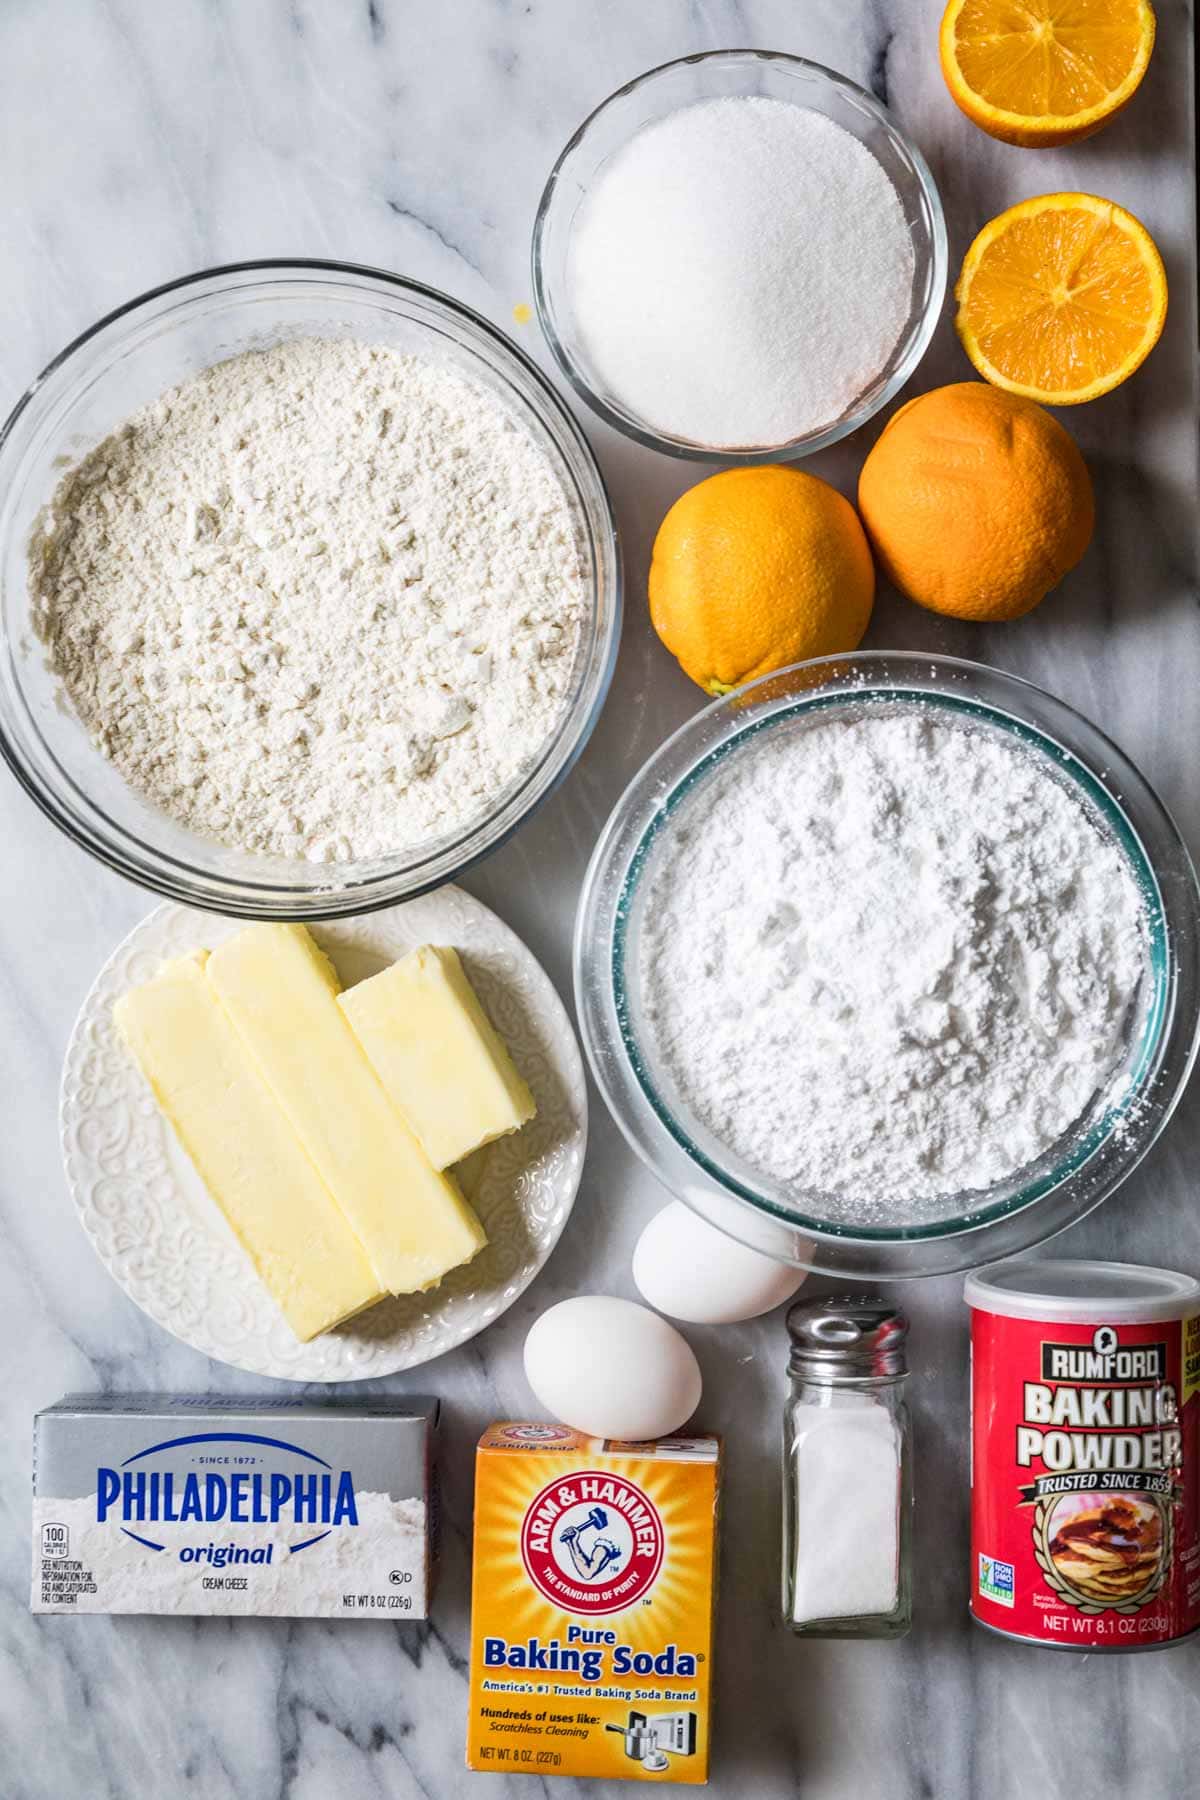 Overhead view of ingredients including oranges, cream cheese, eggs, and more.